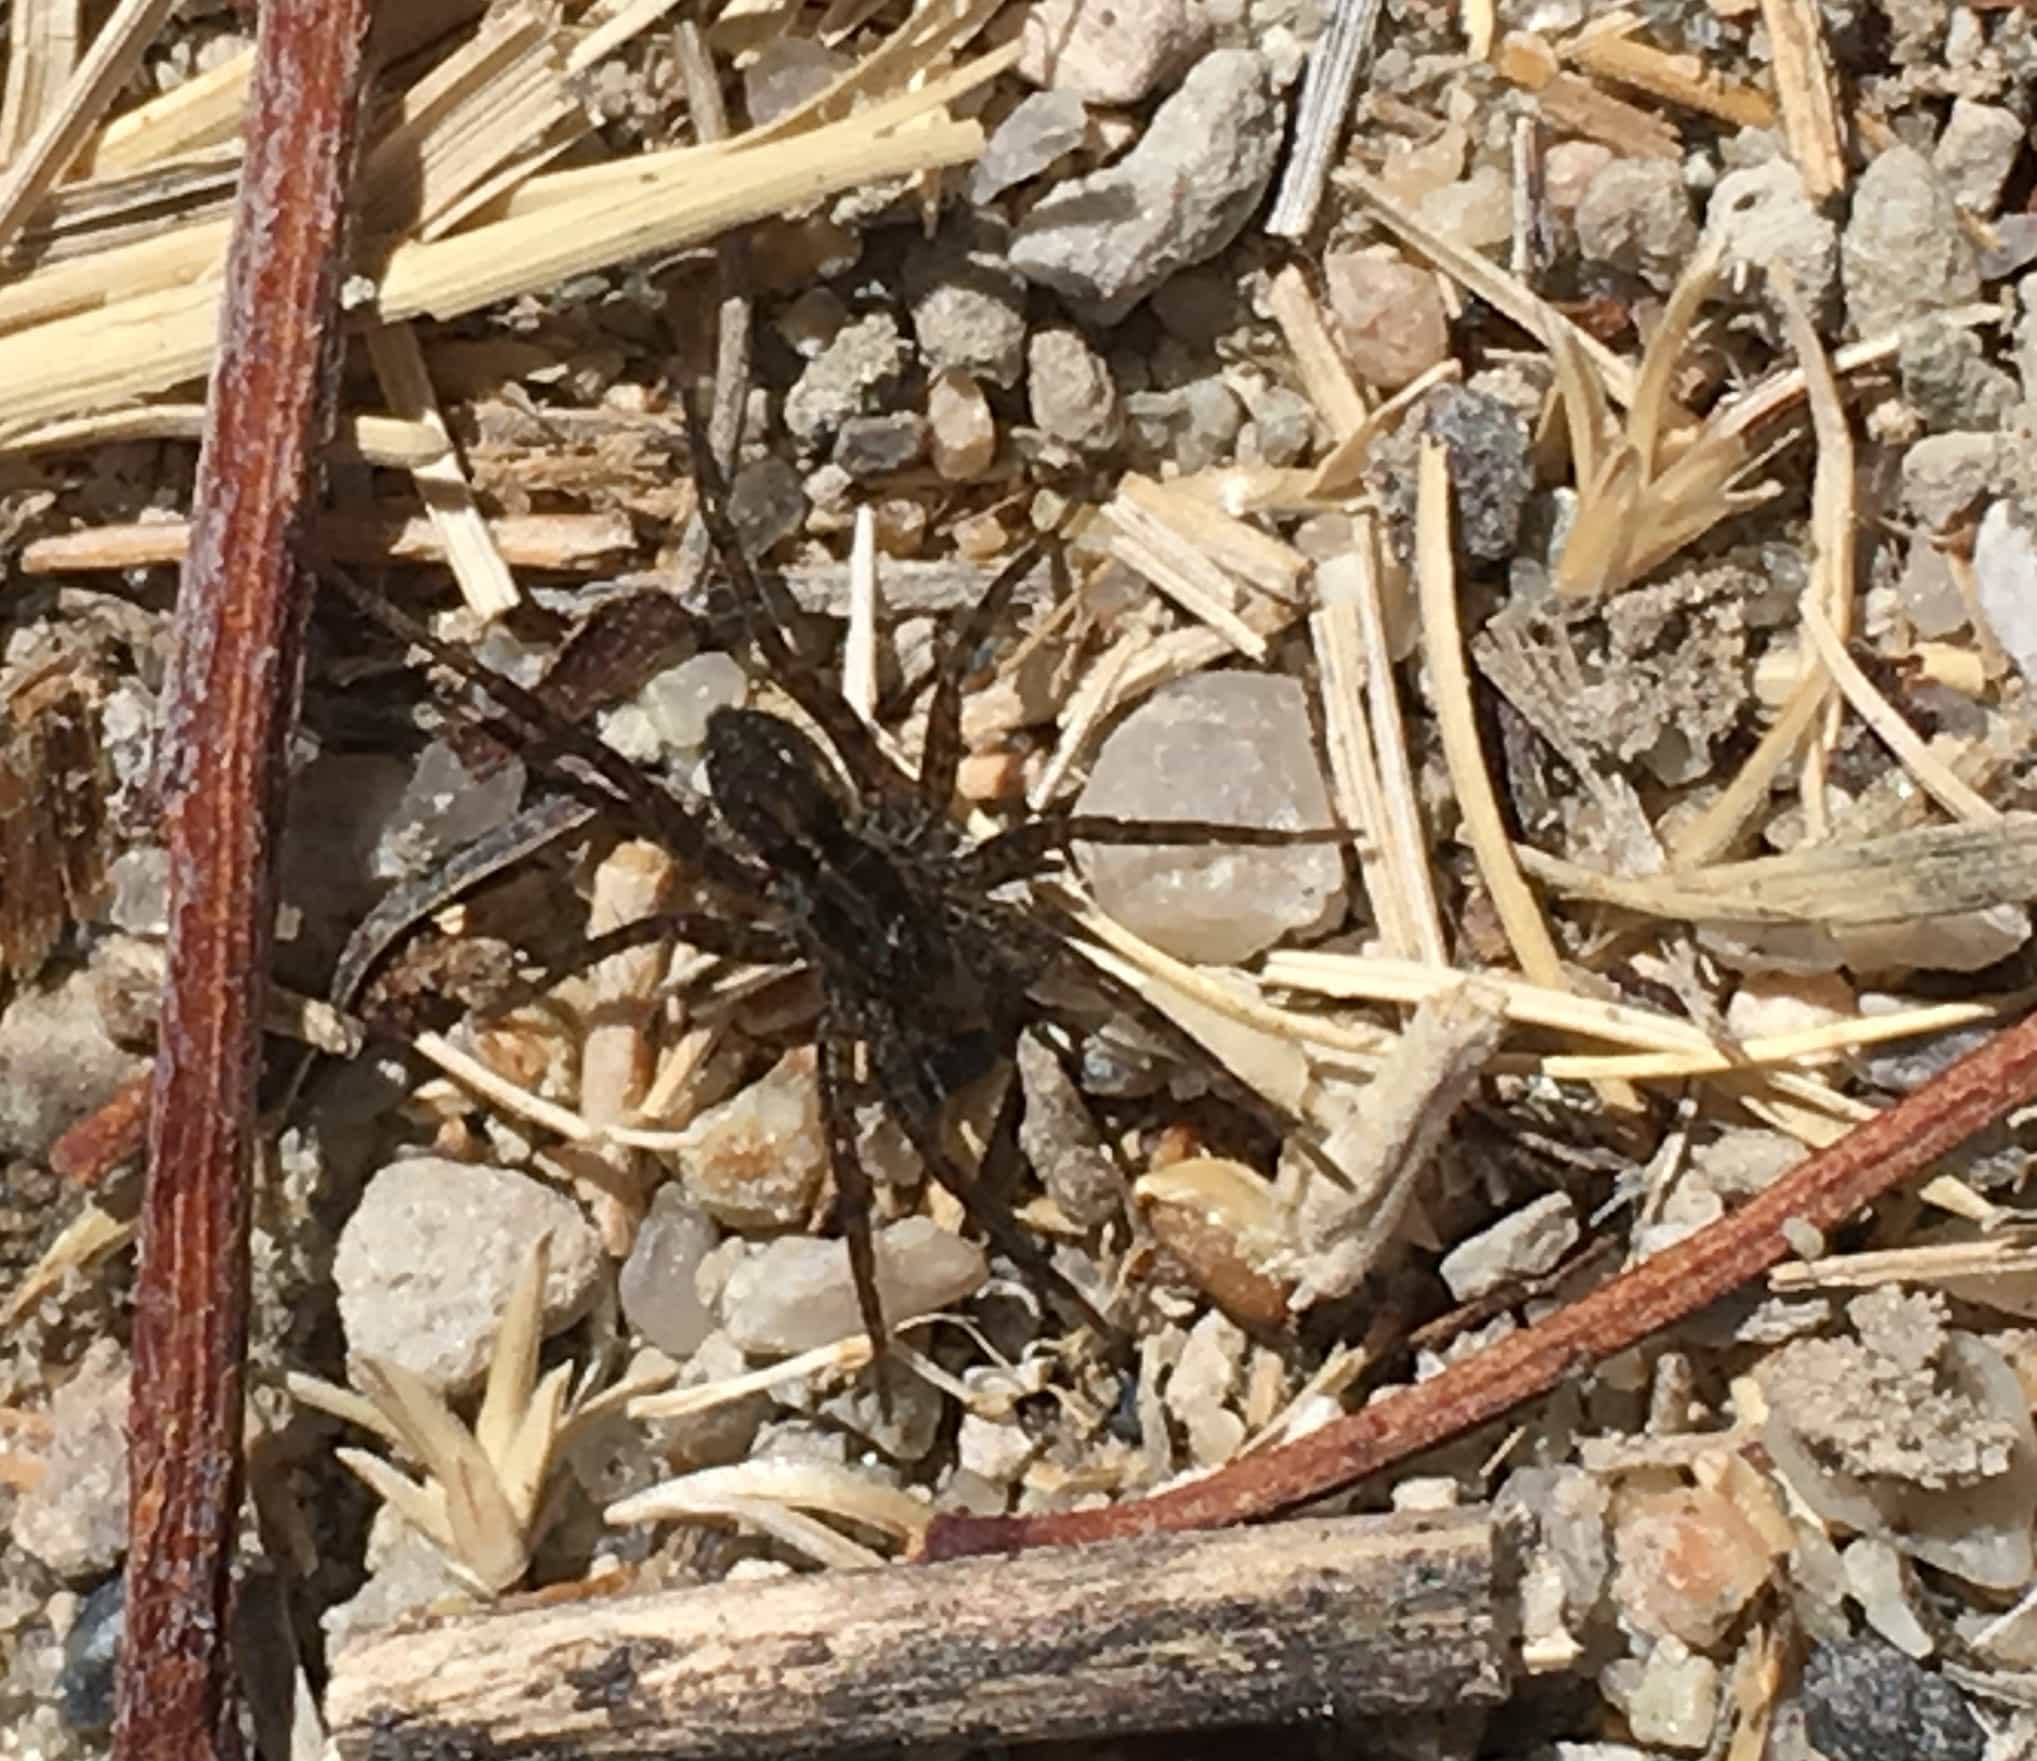 Picture of Pardosa (Thin-legged Wolf Spiders) - Dorsal